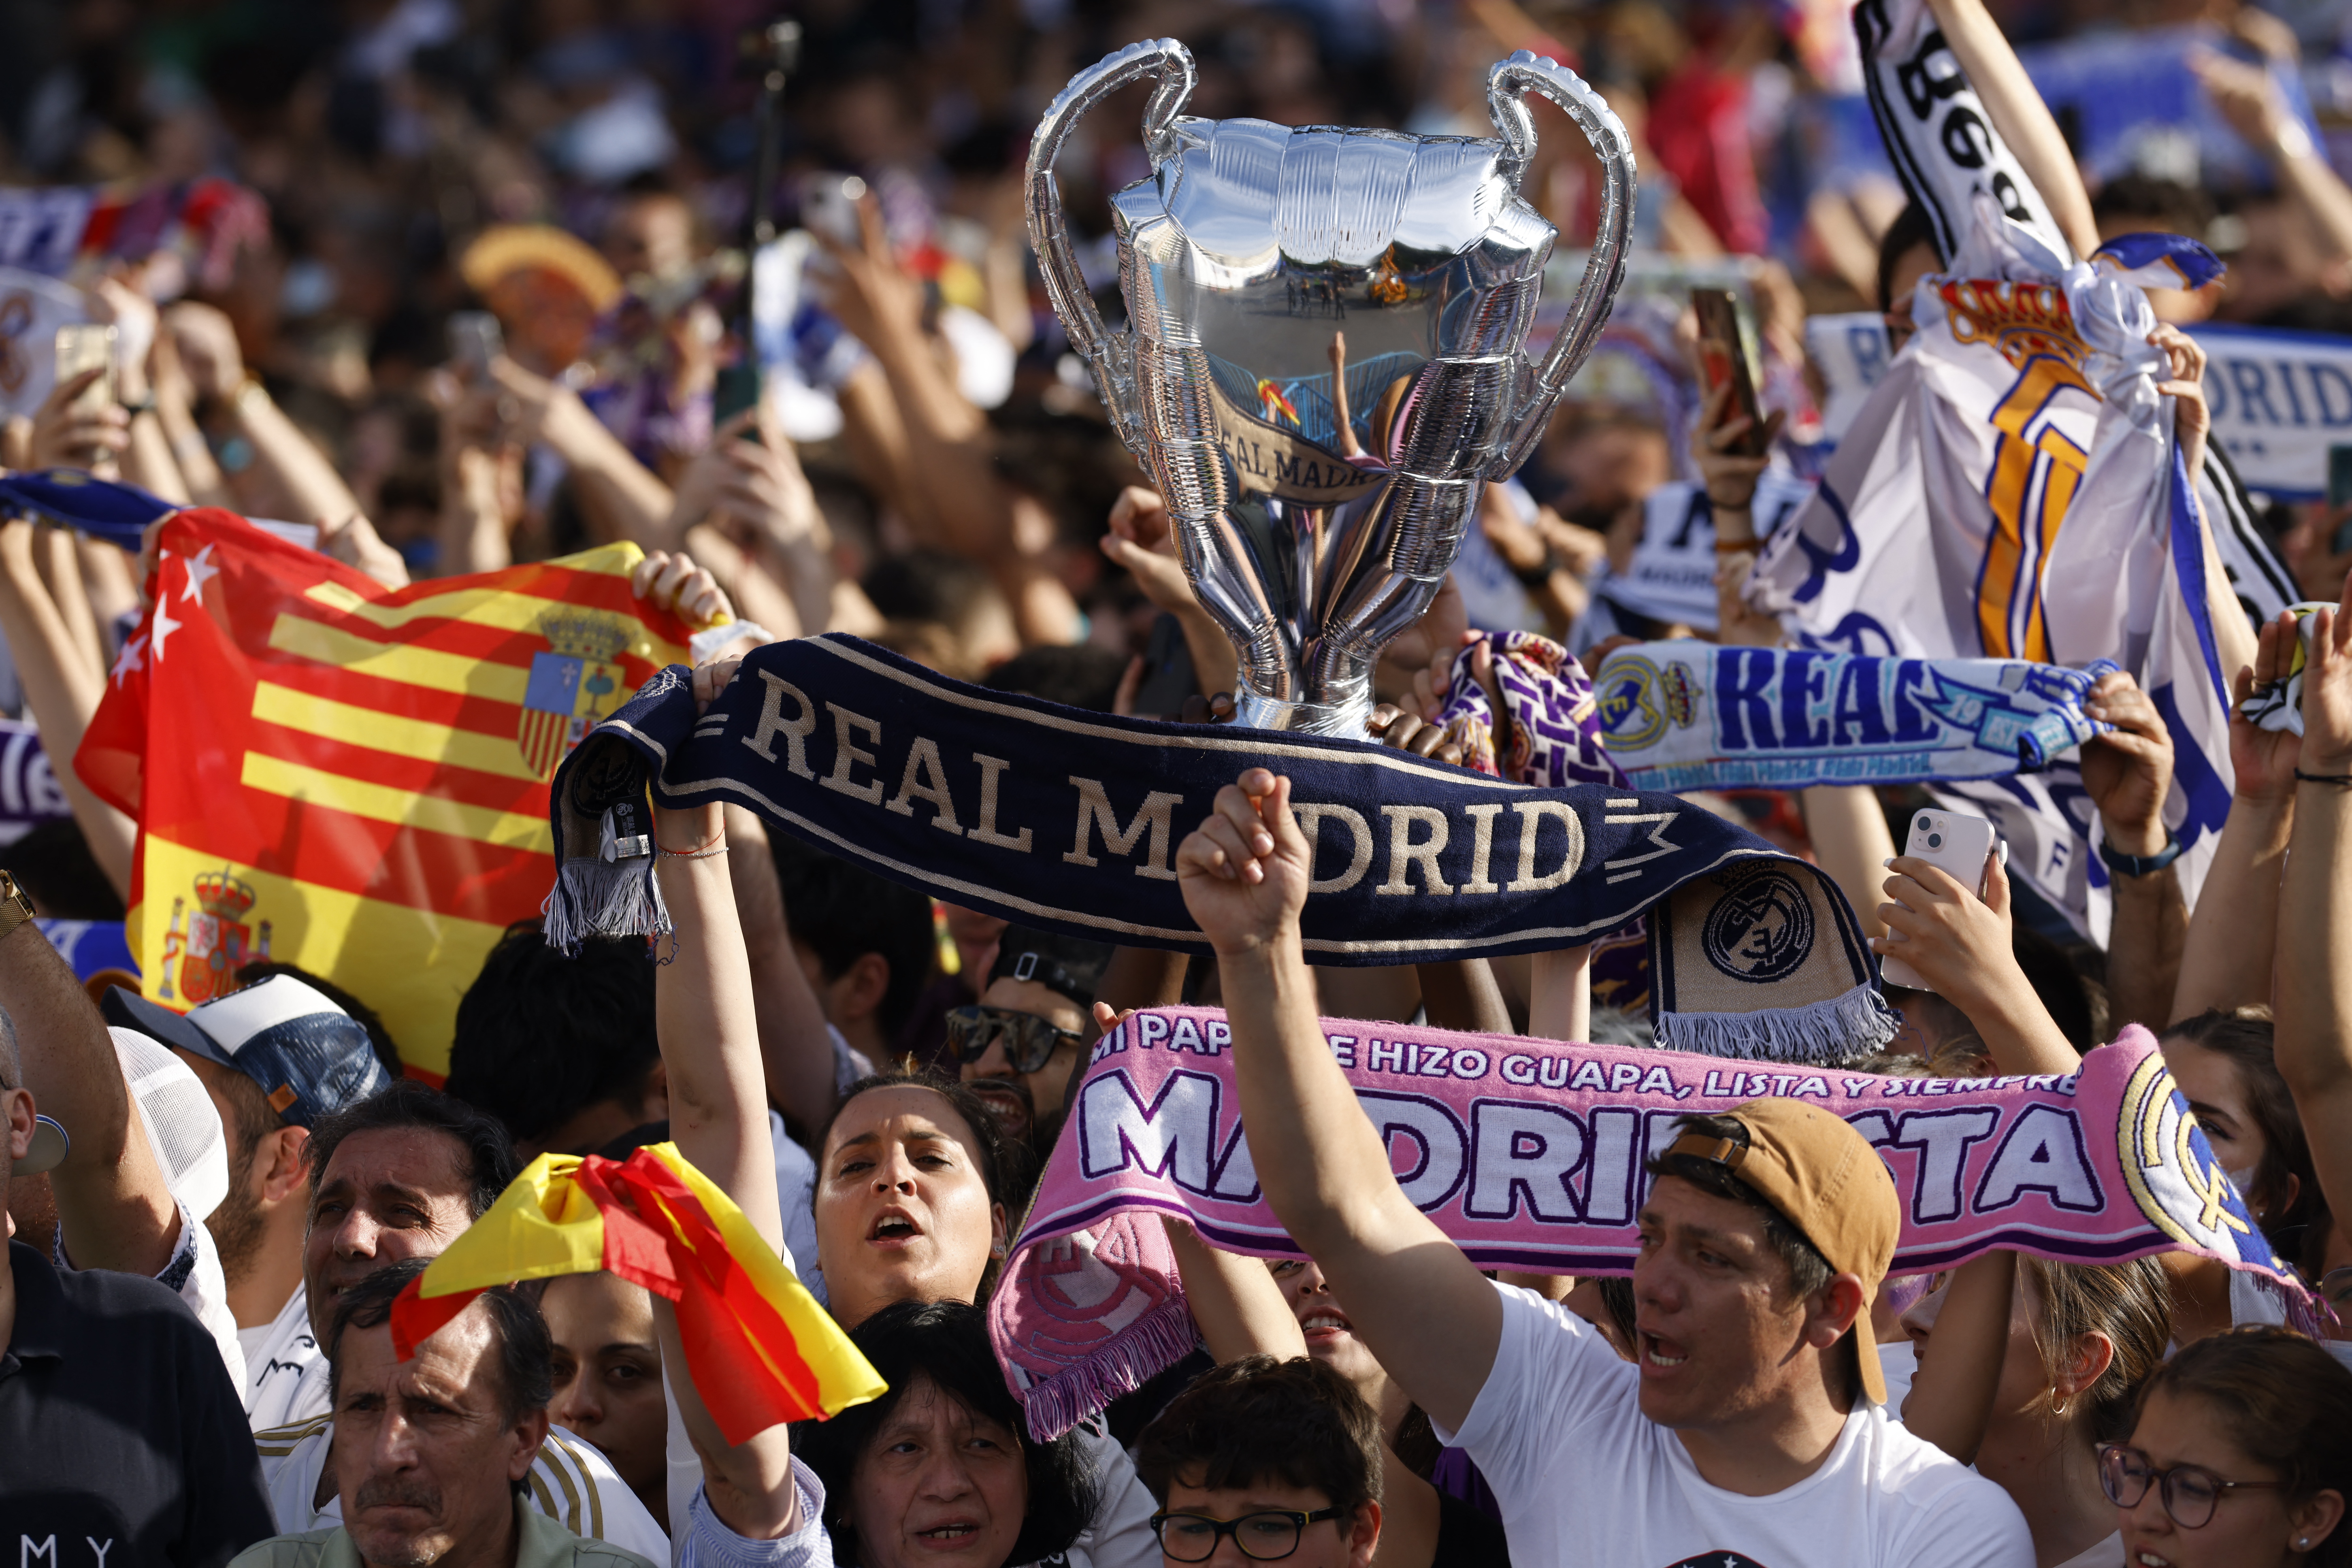 Thousands of Real fans celebrate Champions league title with team | Reuters